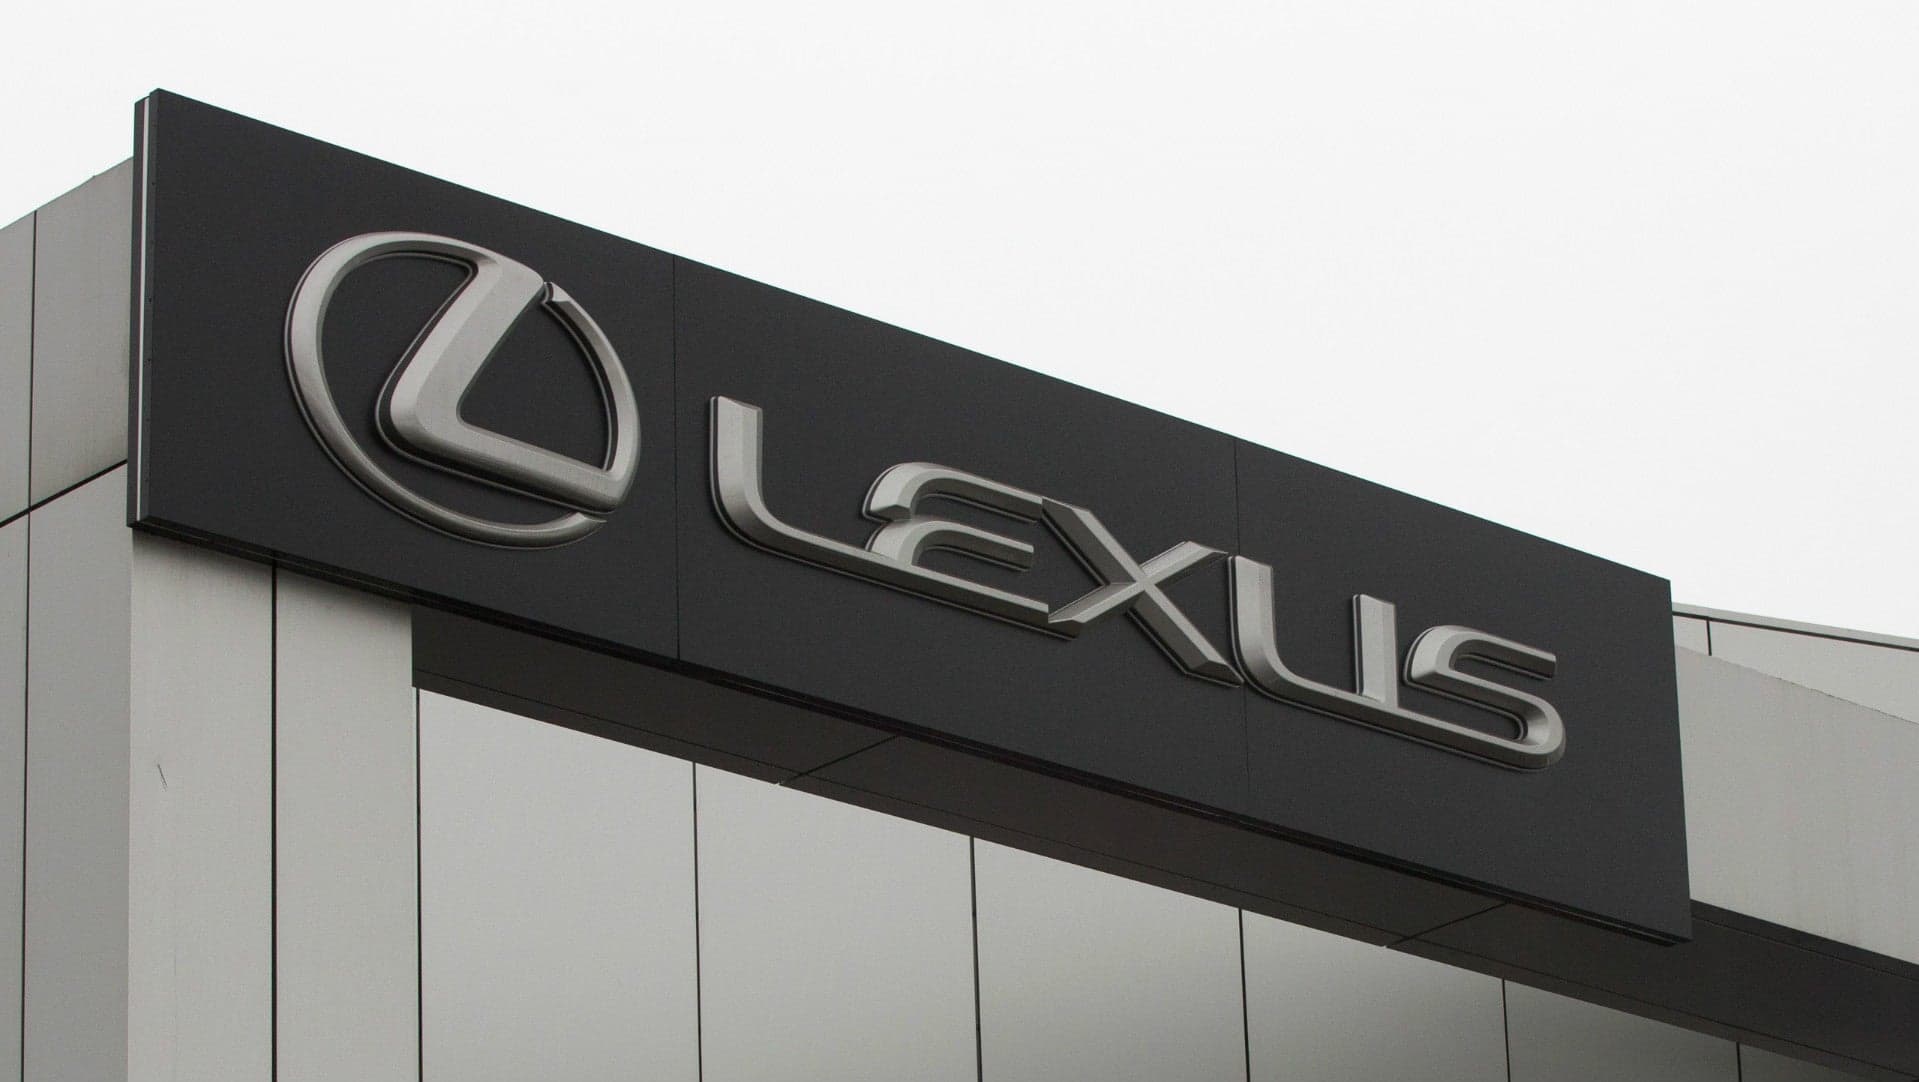 Lexus Turns Handicapped Parking Spots into ‘Lexus Only’ Zone at Calgary Airport